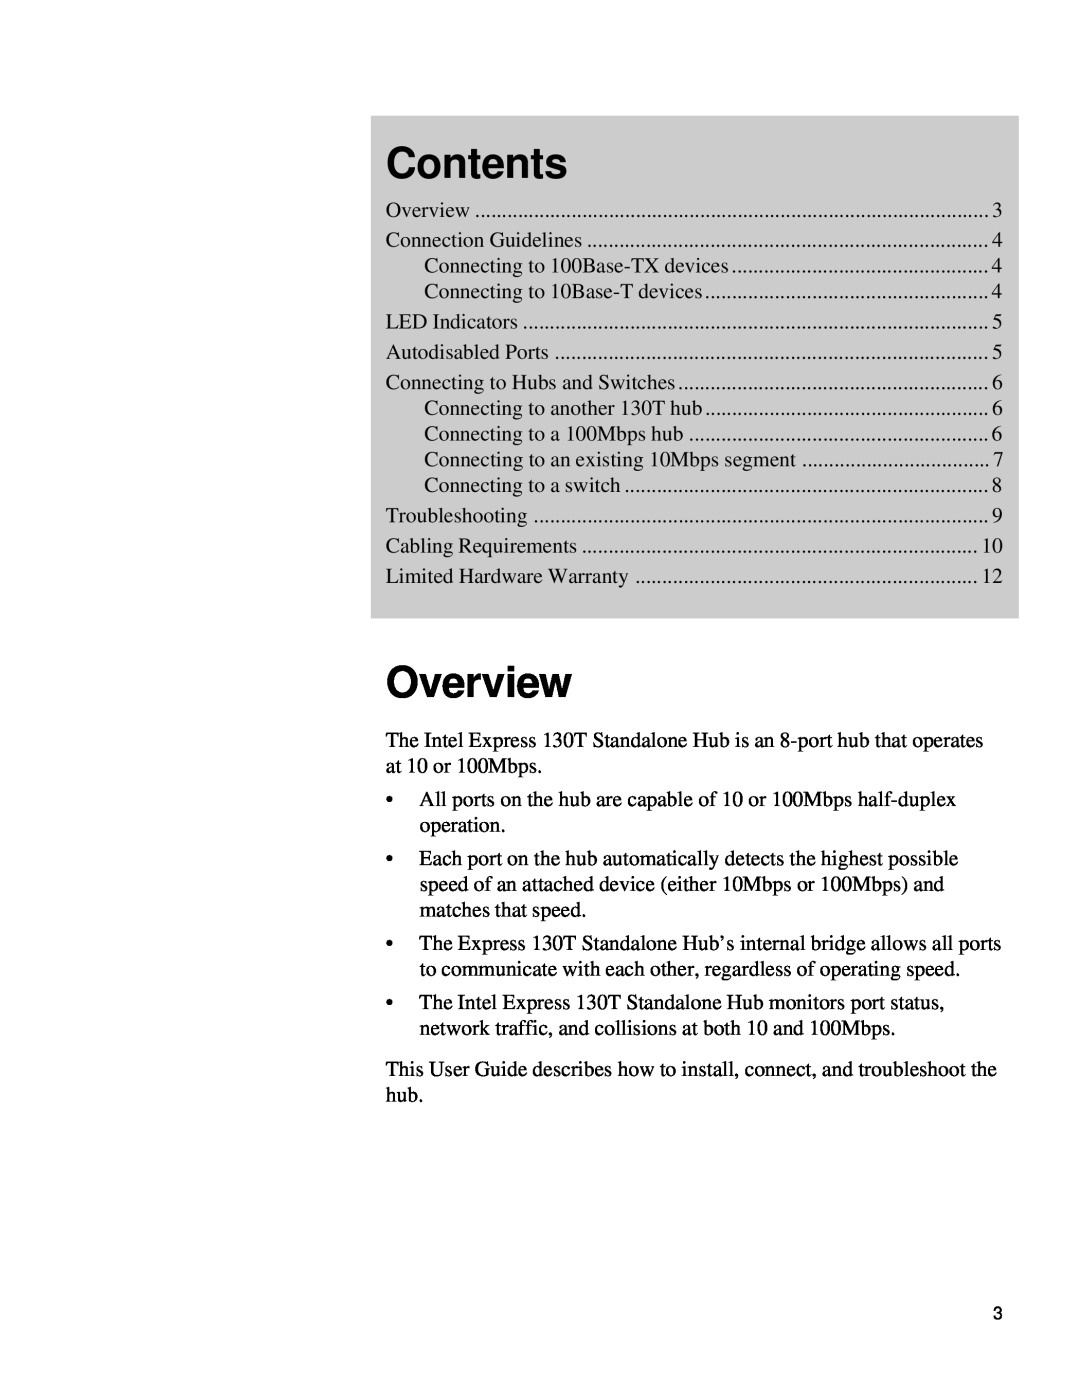 Intel 130T manual Contents, Overview 